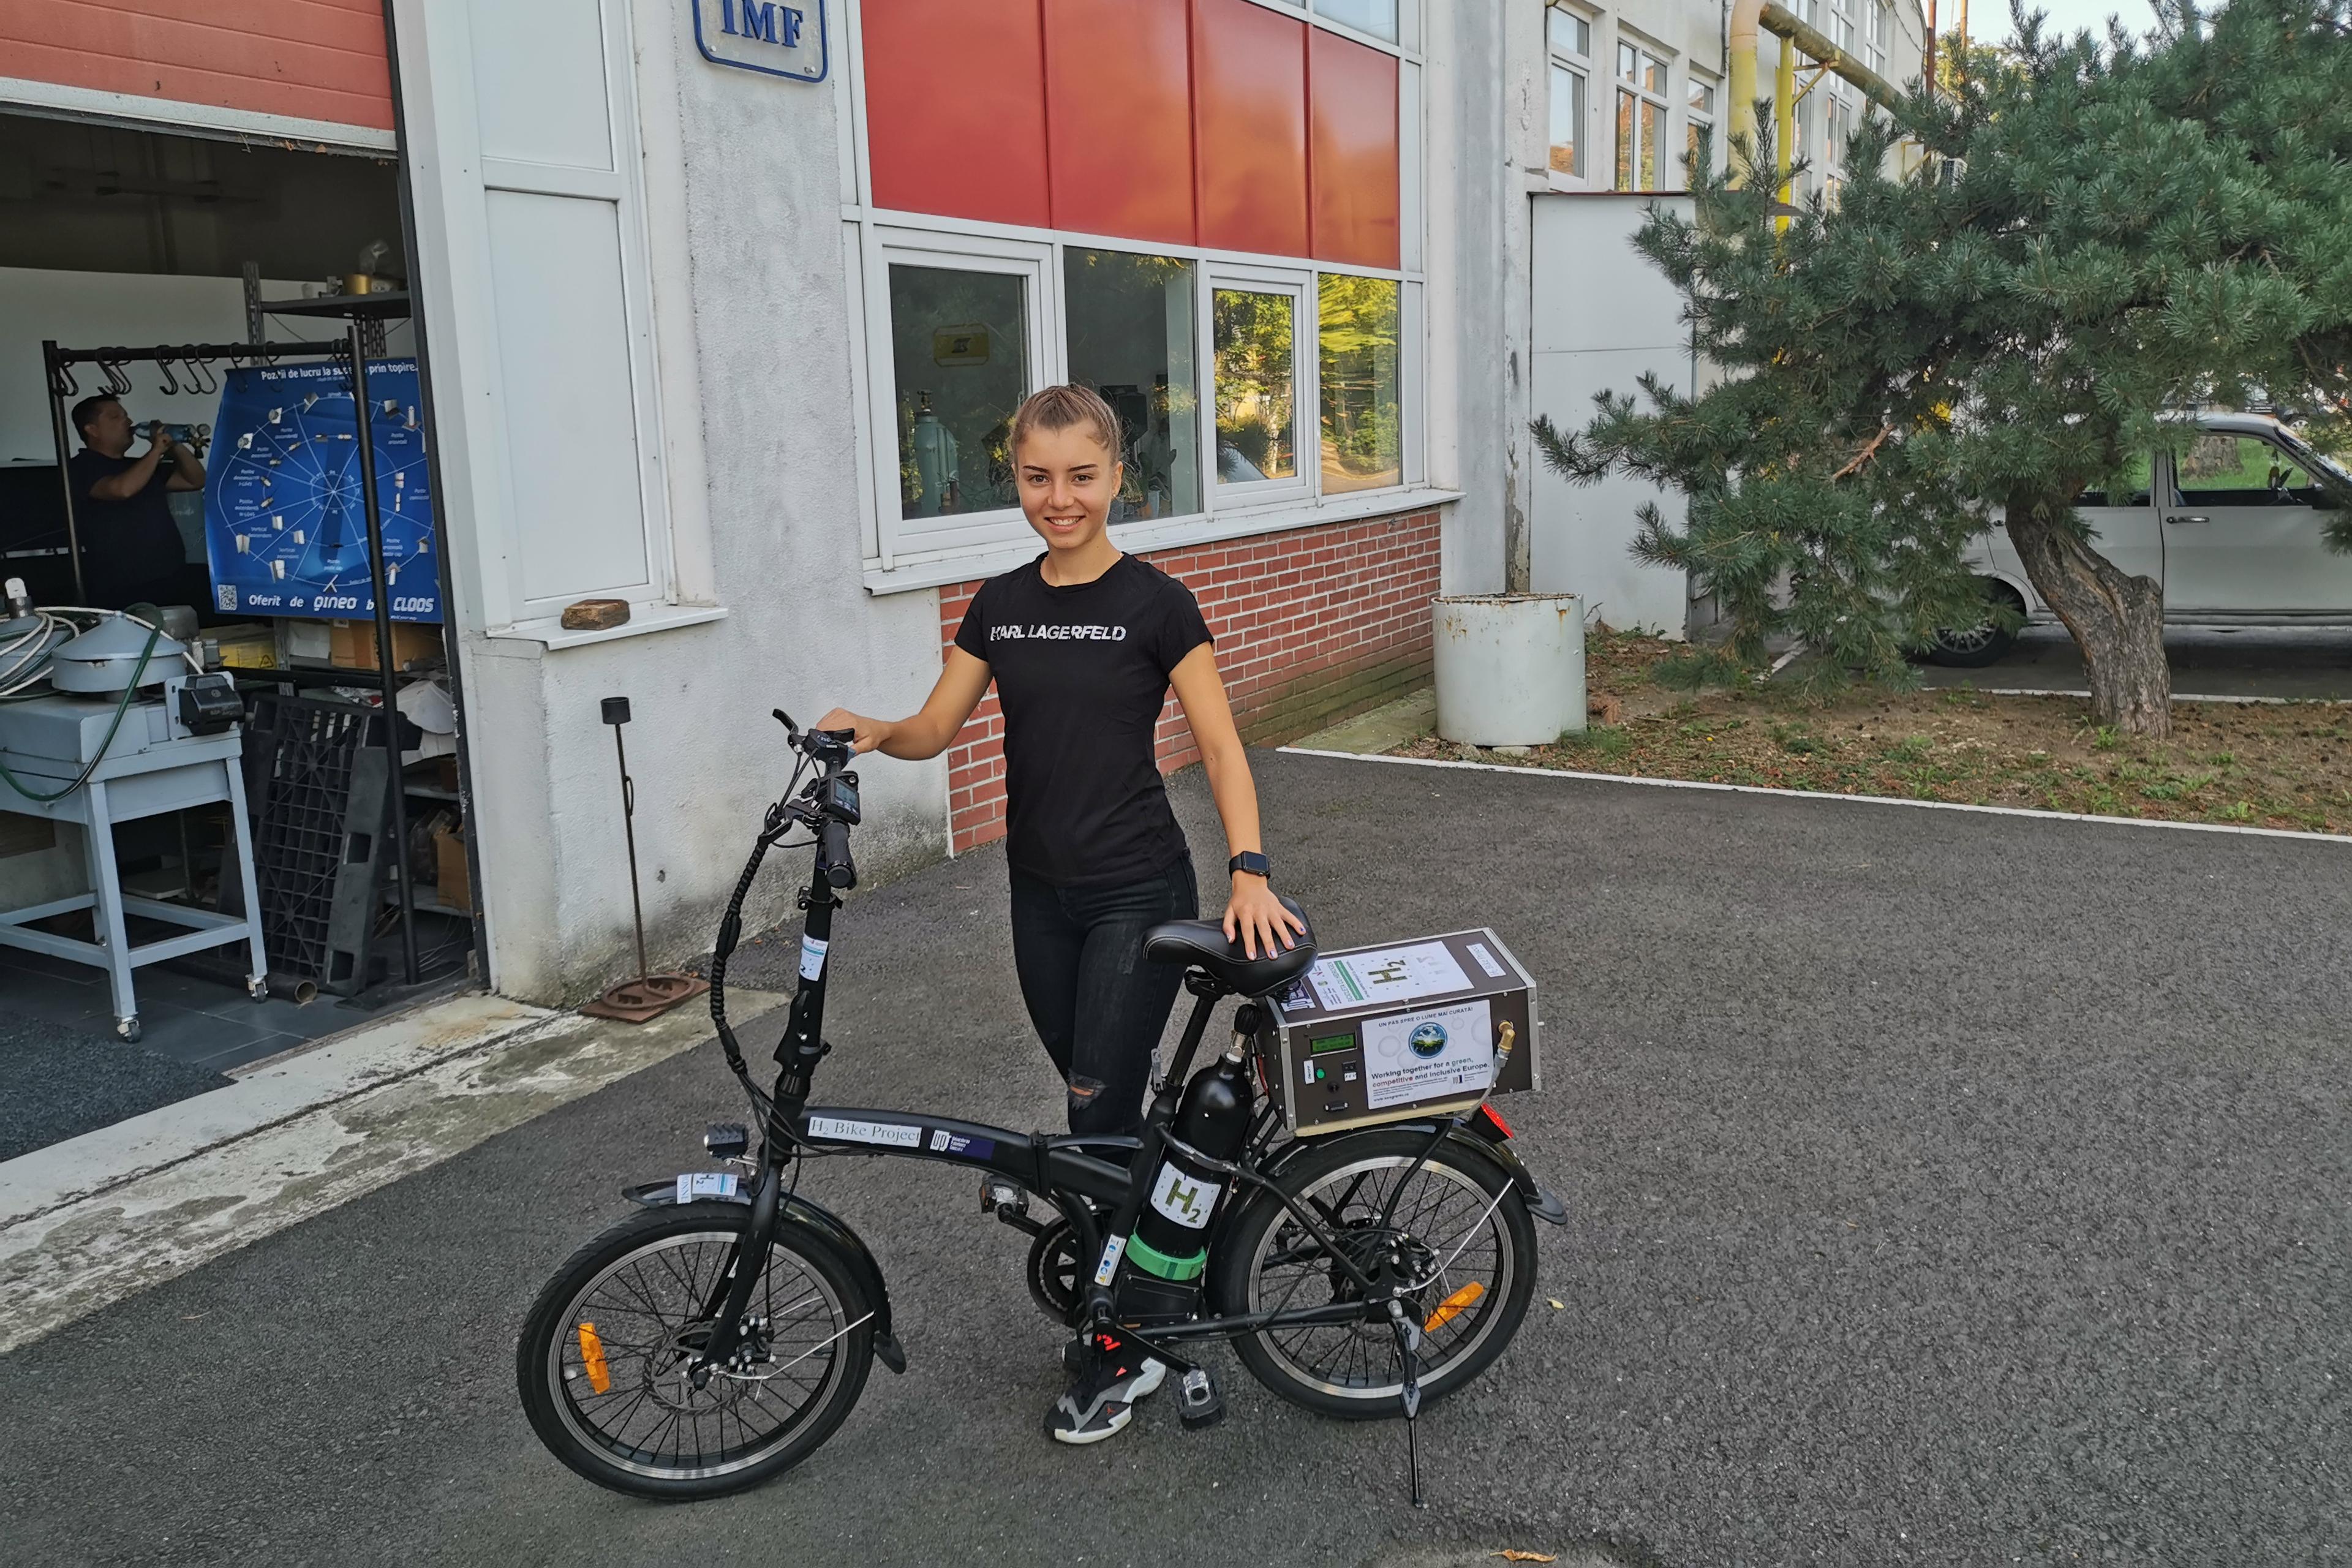 The student Deliana Maria and the hydrogen bike